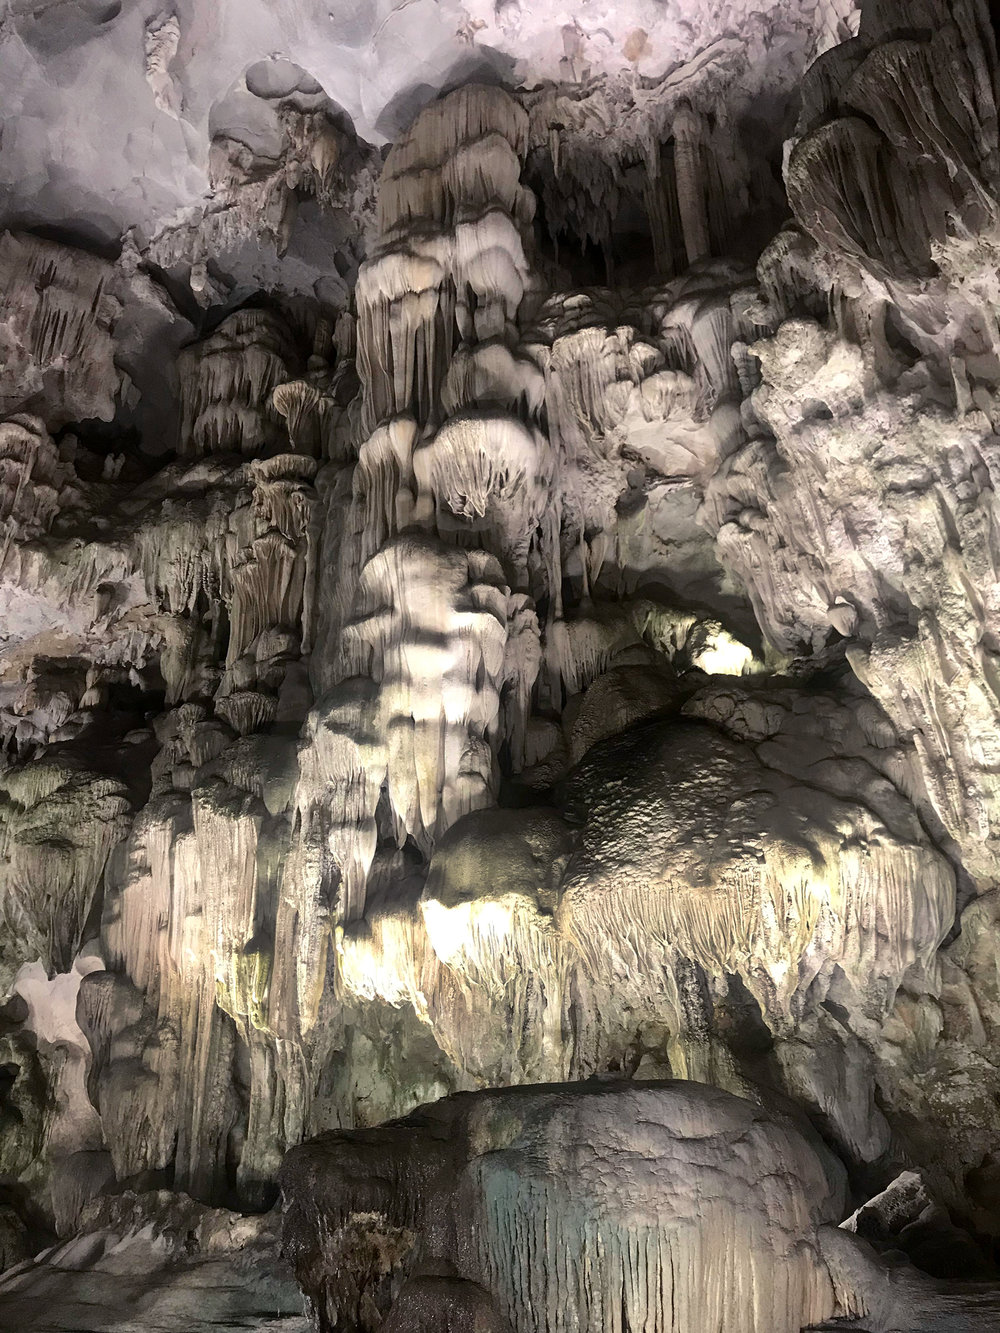  DONG THIEN CUNG (STALACTITE AND STALAGMITE CAVES) 